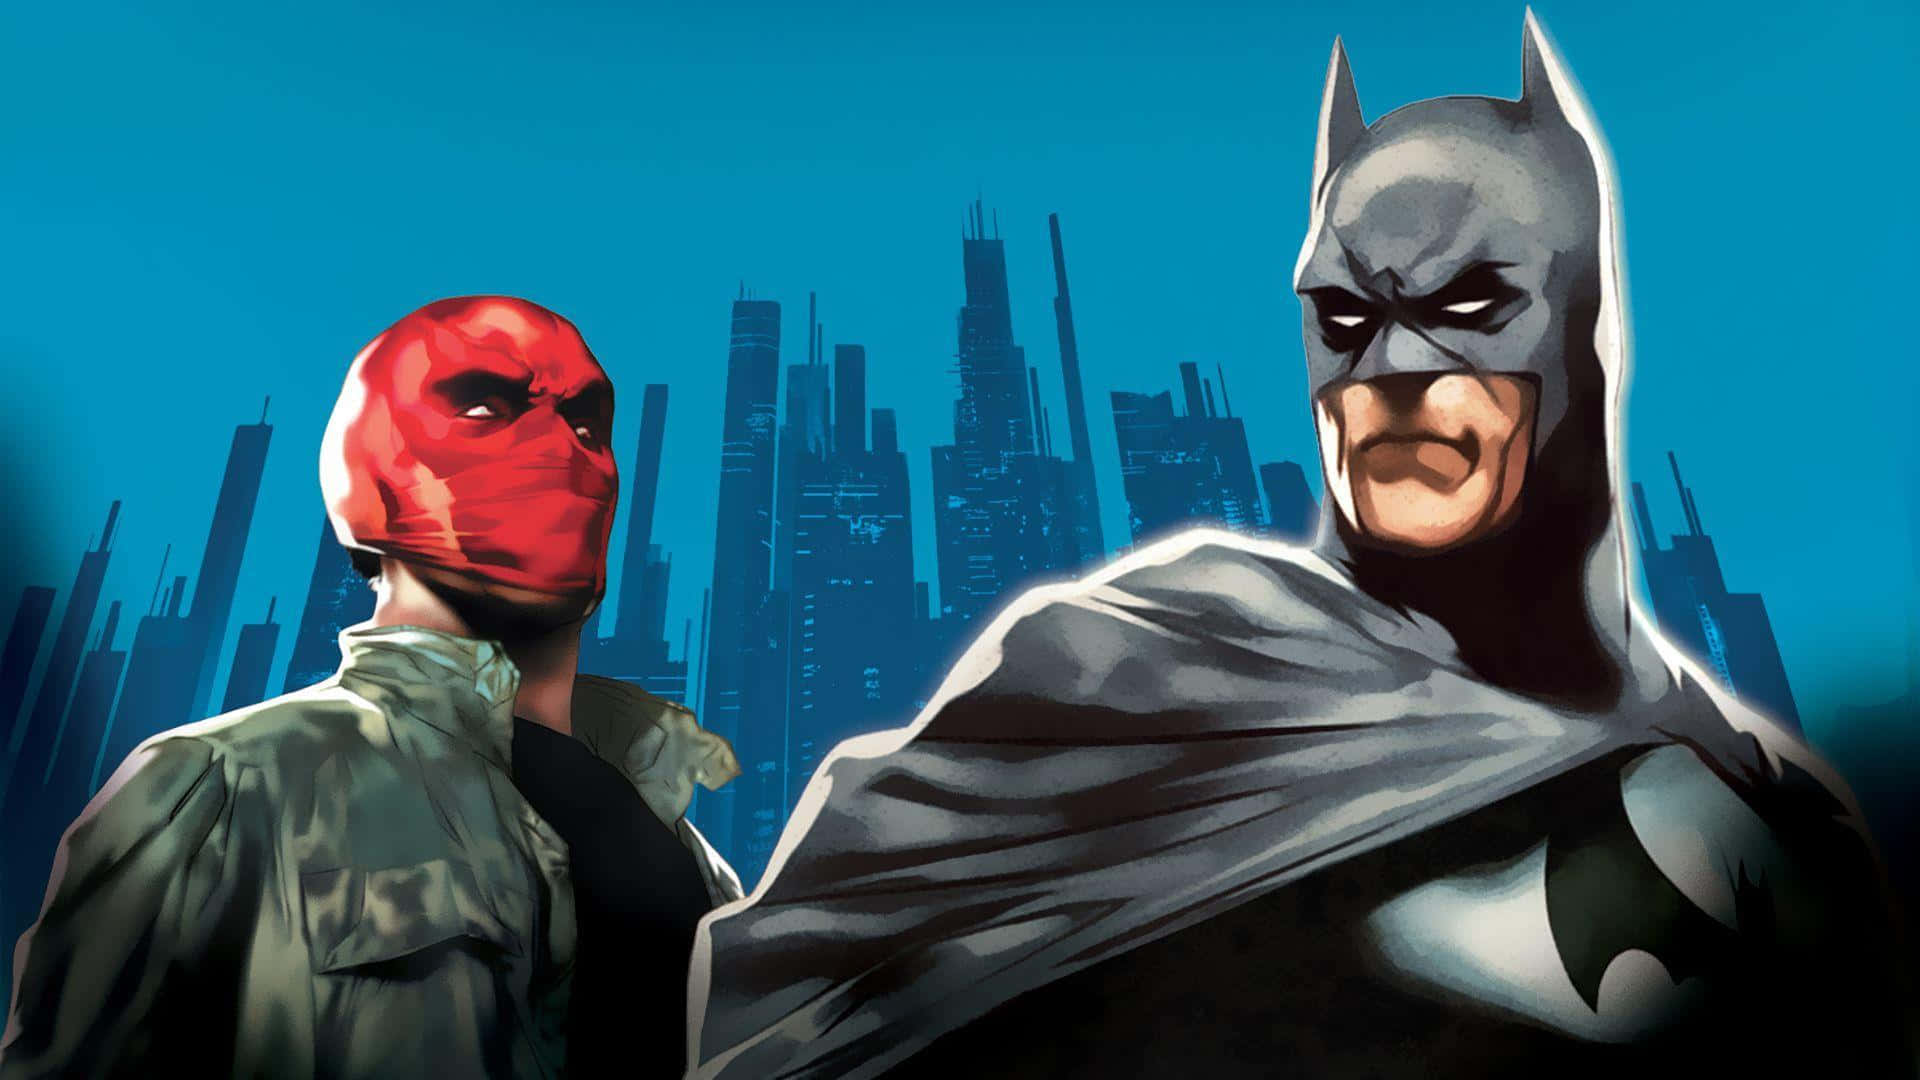 Batman confronts the Red Hood in an intense scene from the animated film Wallpaper